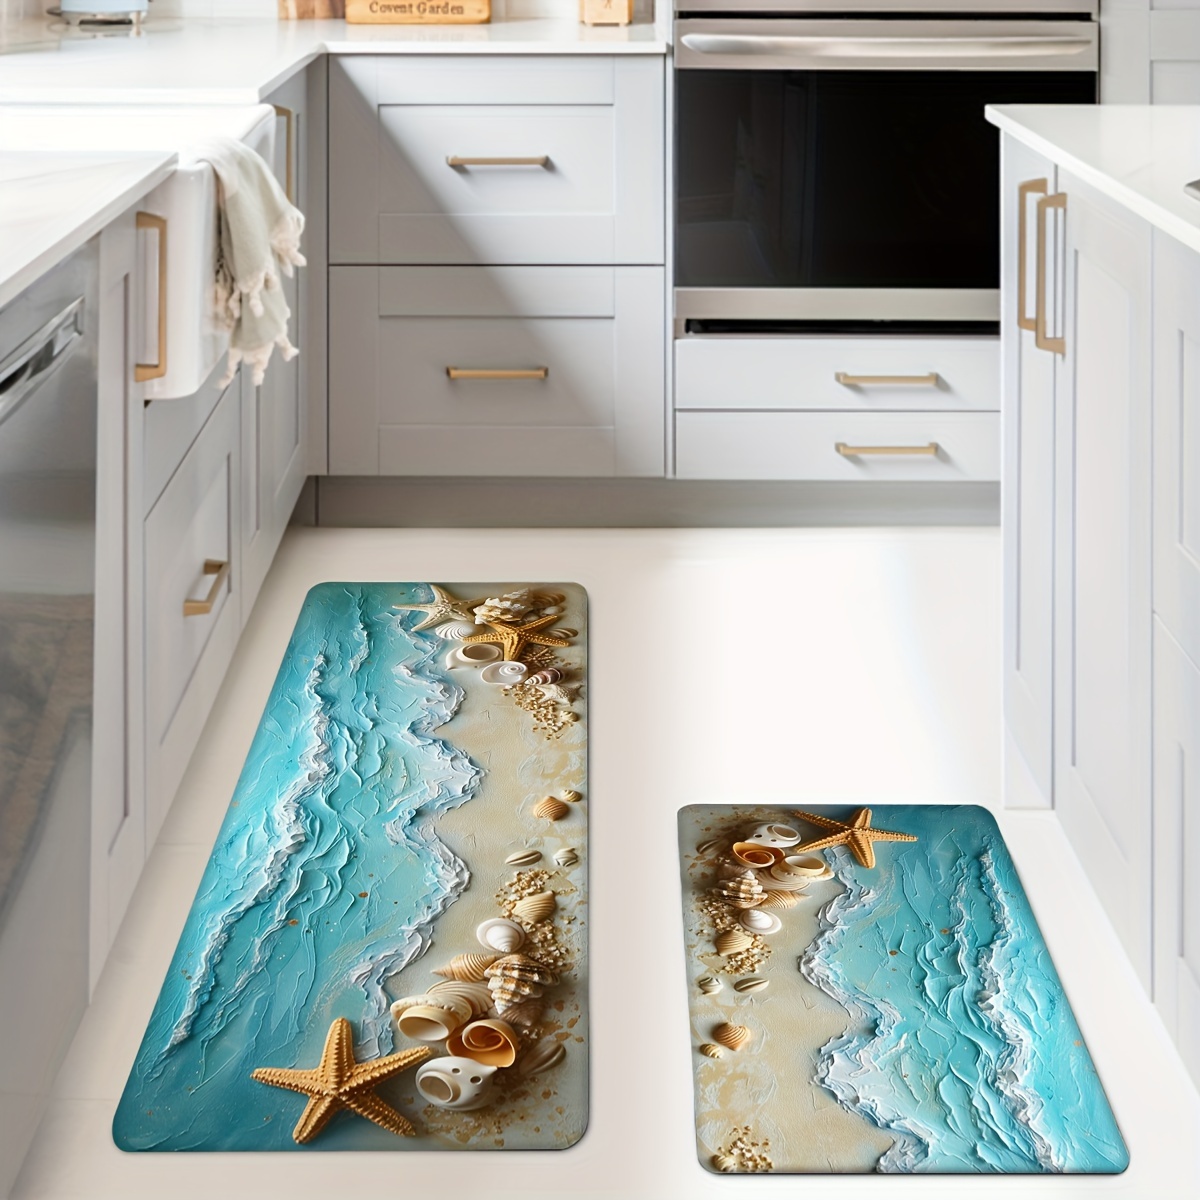 

1pc/2pcs, Sea Shells Kitchen Mats, Non-slip And Durable Bathroom Pads For Floor, Comfortable Standing Runner Rugs, Carpets For Kitchen, Home, Office, Laundry Room, Bathroom, Spring Decor